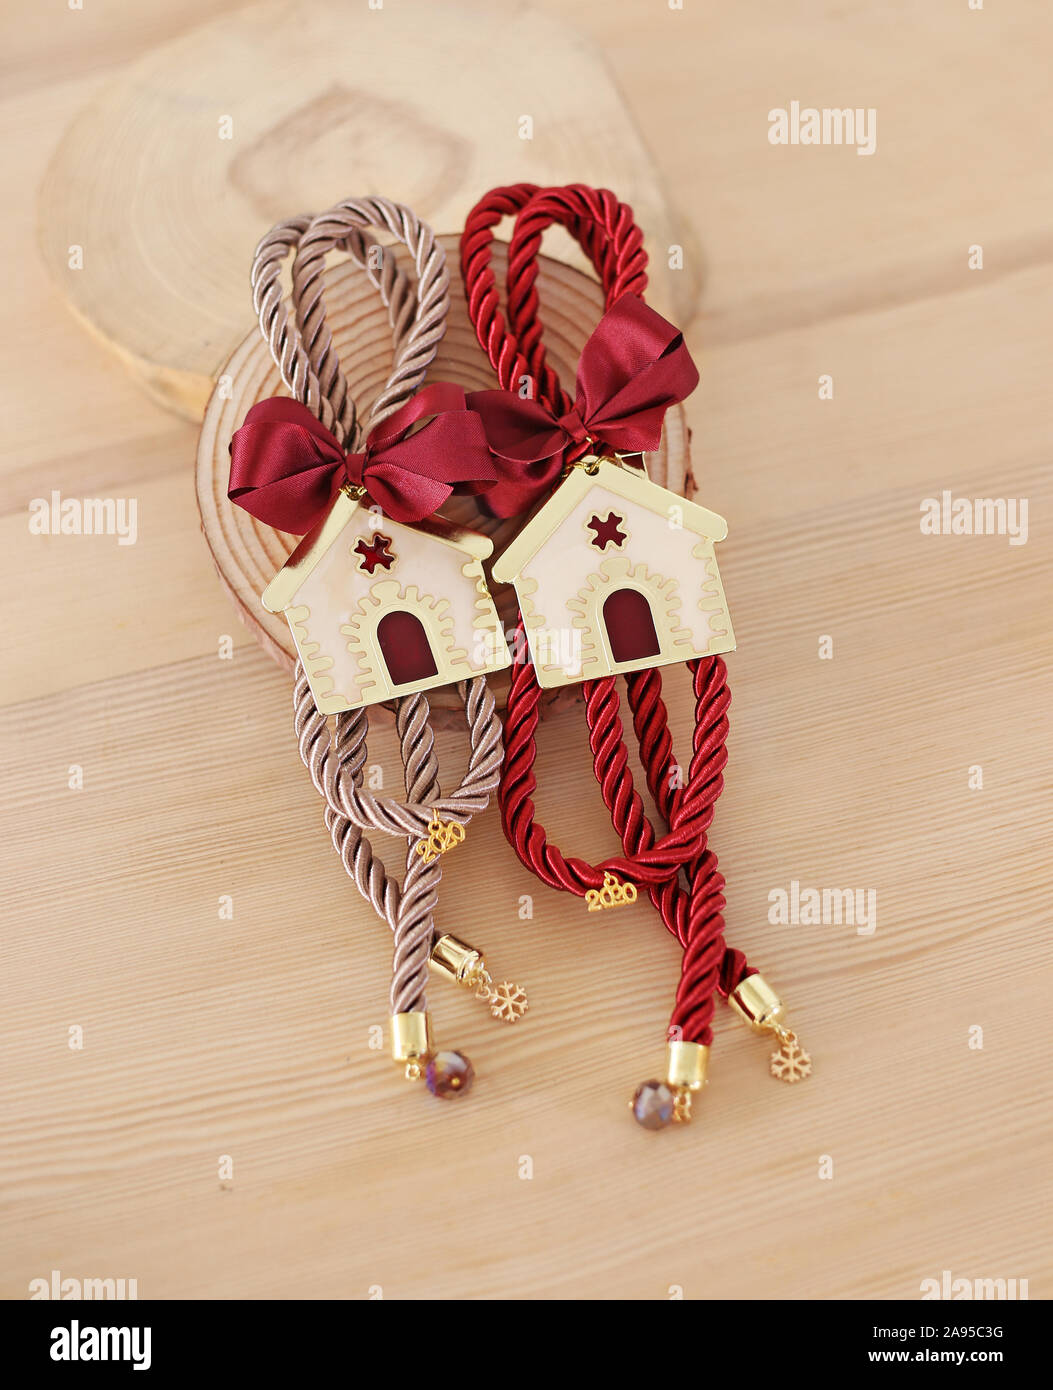 decorative Christmas lucky charms 2020 with metallic houses and ribbons Stock Photo